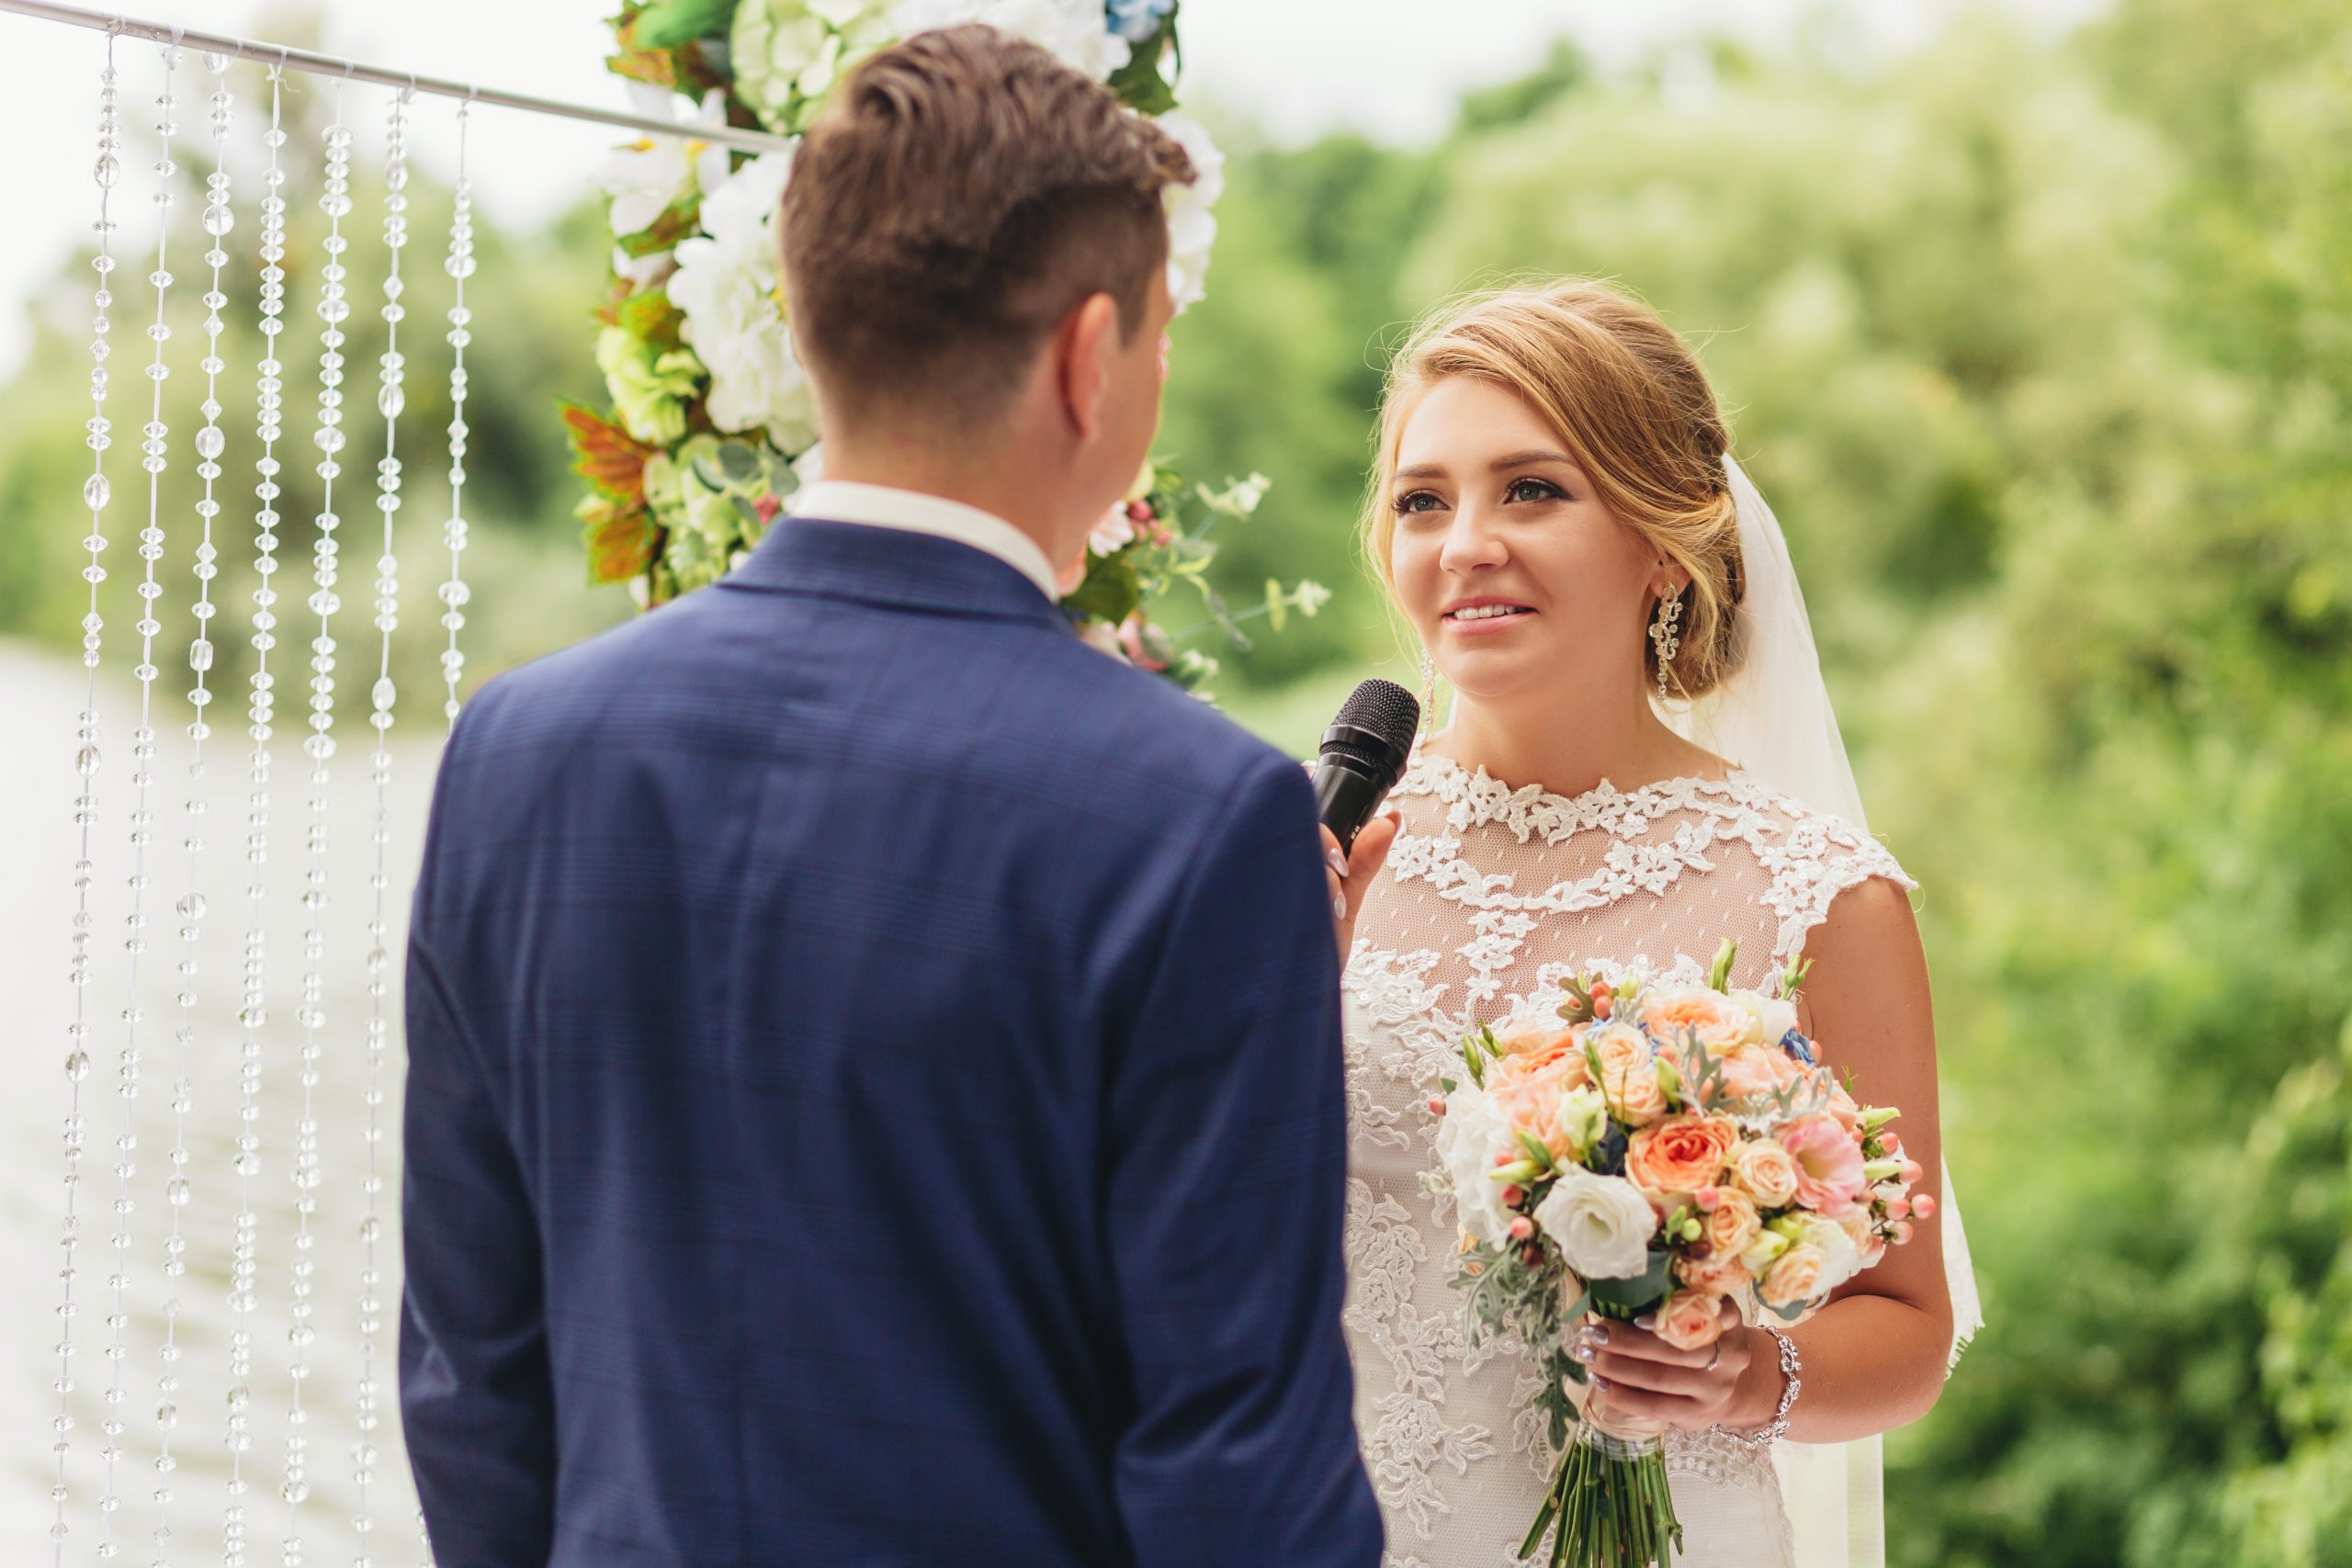 31 Funny Lines To Include In Your Wedding Vows - Wedding Journal